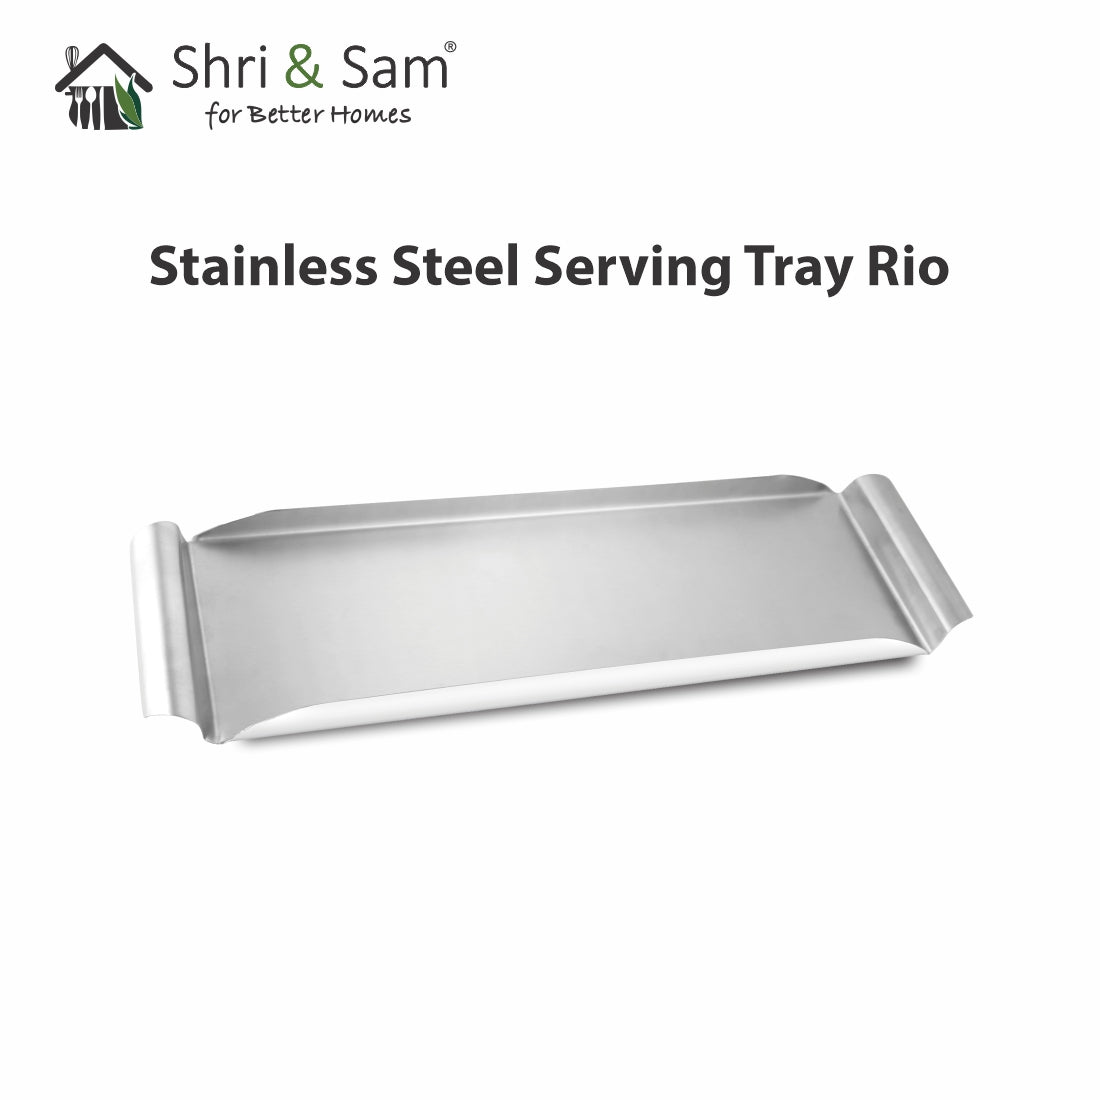 Stainless Steel Serving Tray Rio